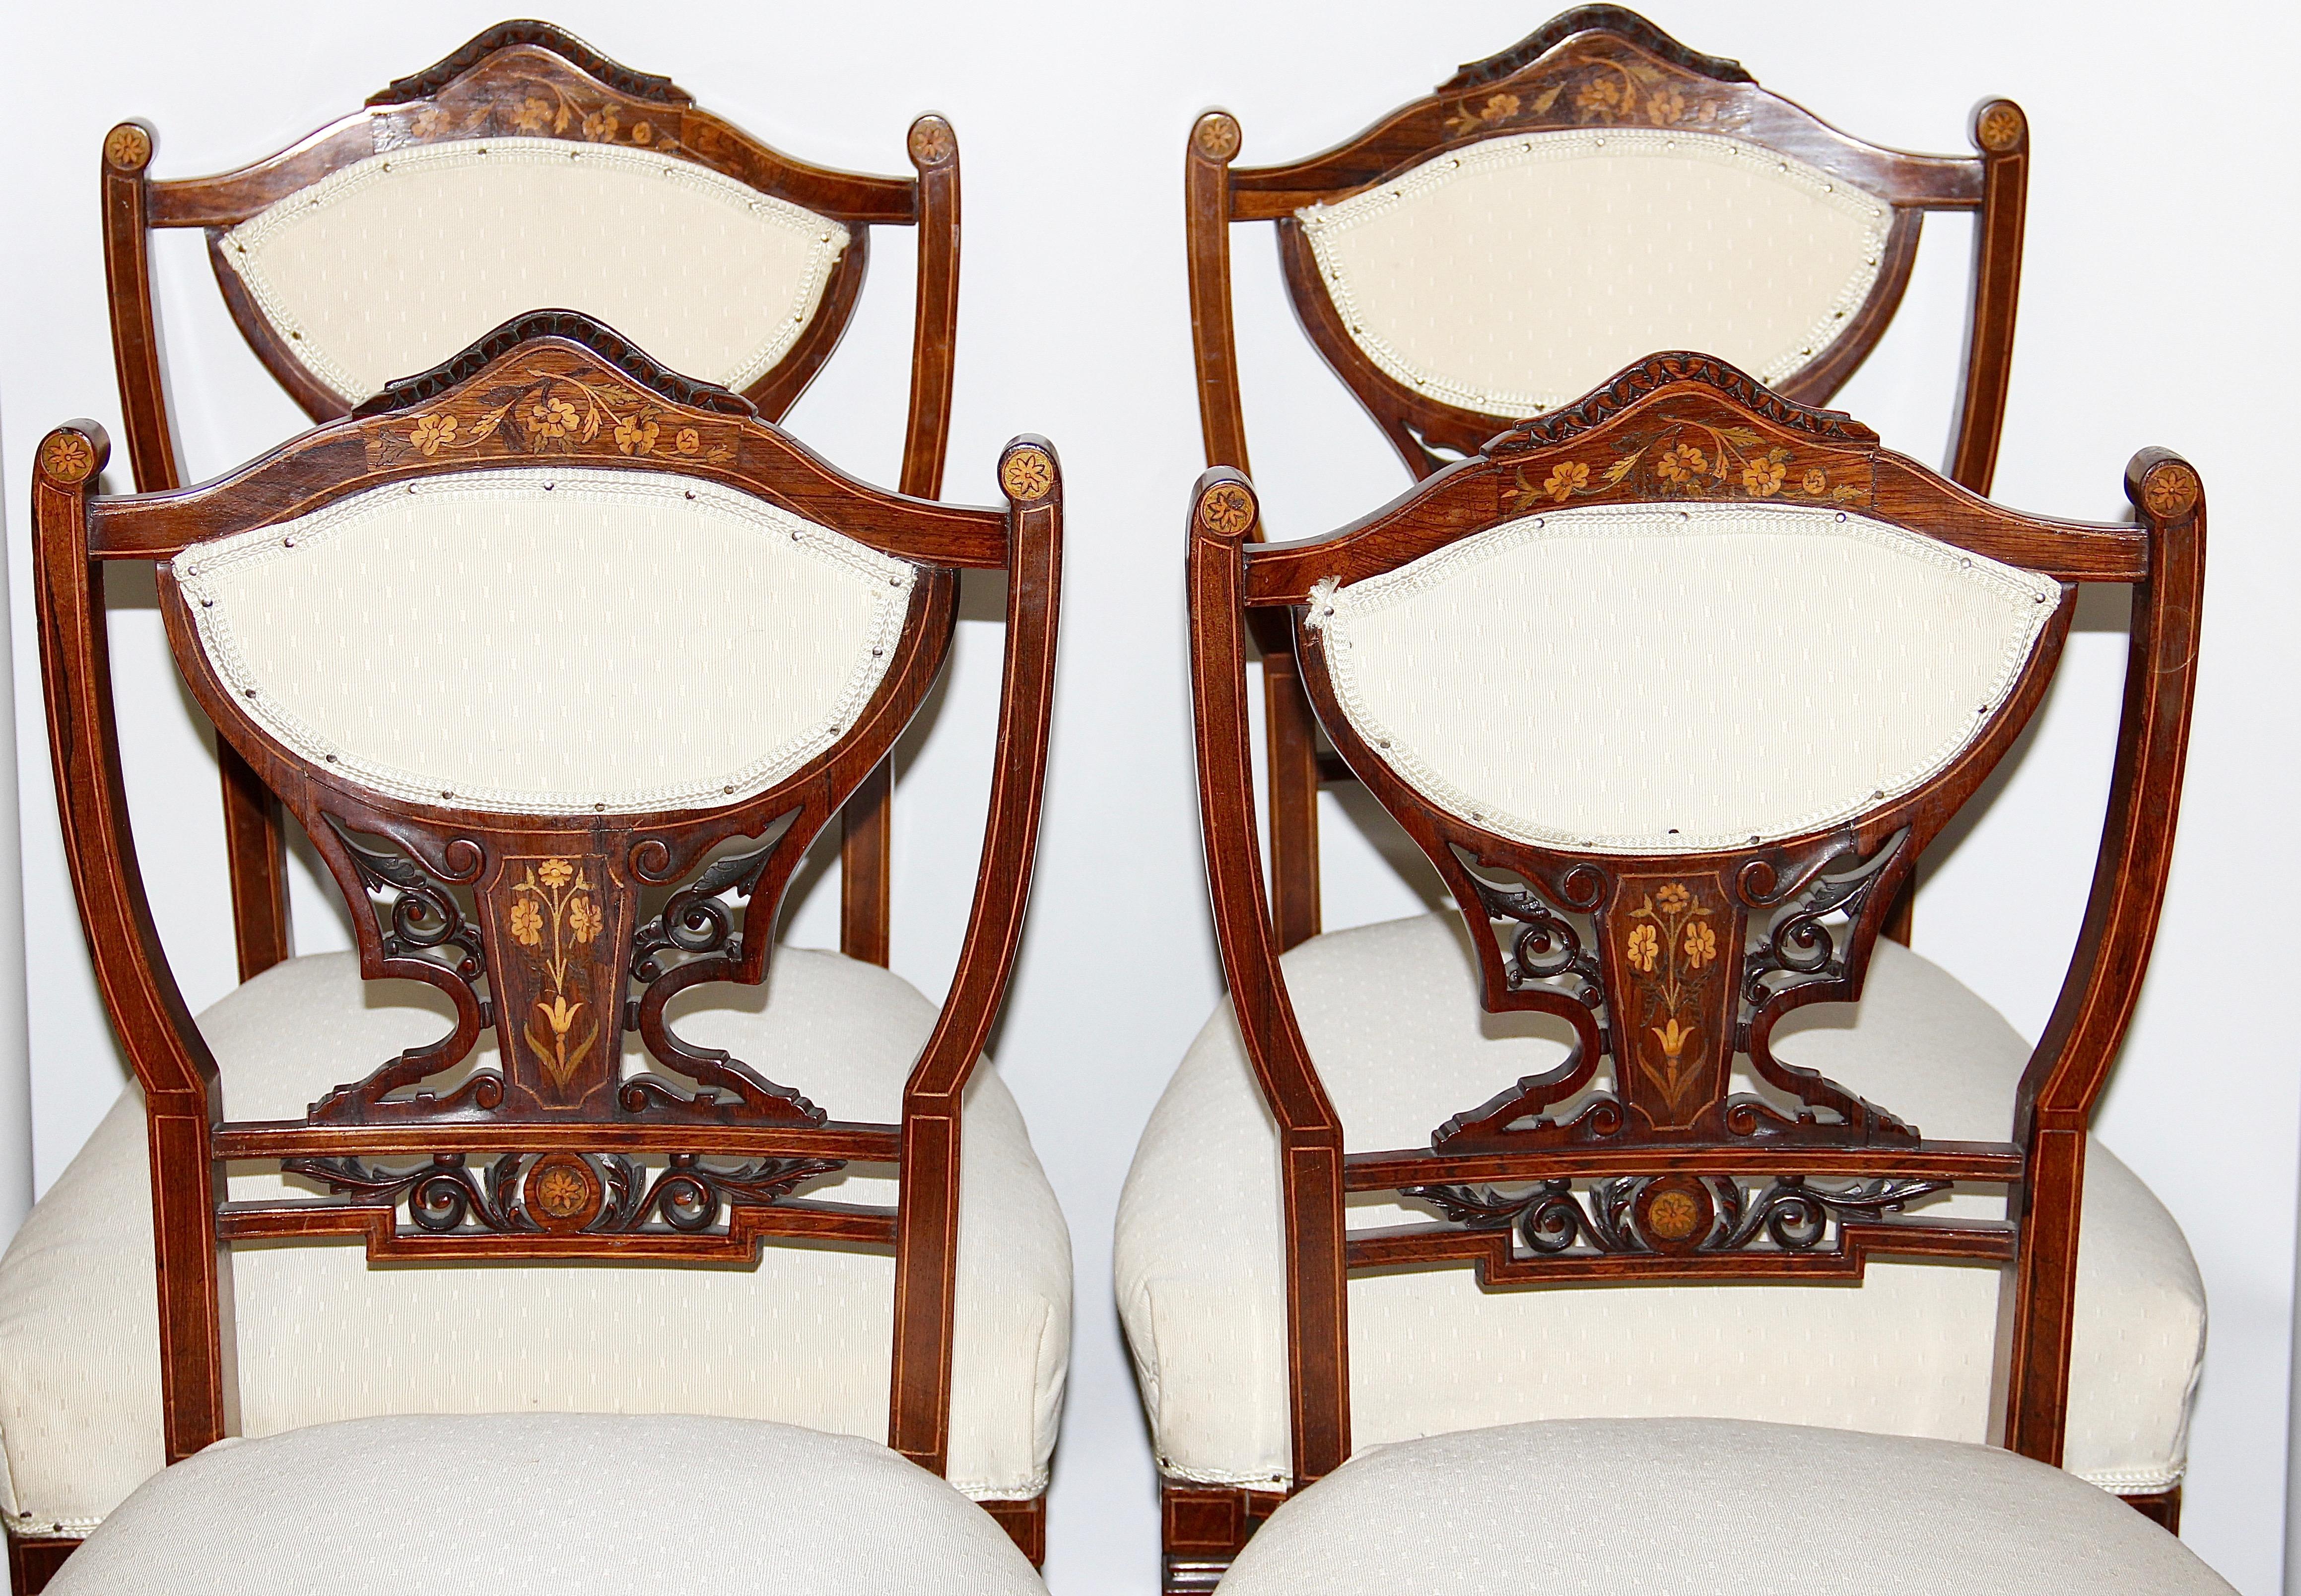 Set of four antique inlaid side chairs, 19th century.